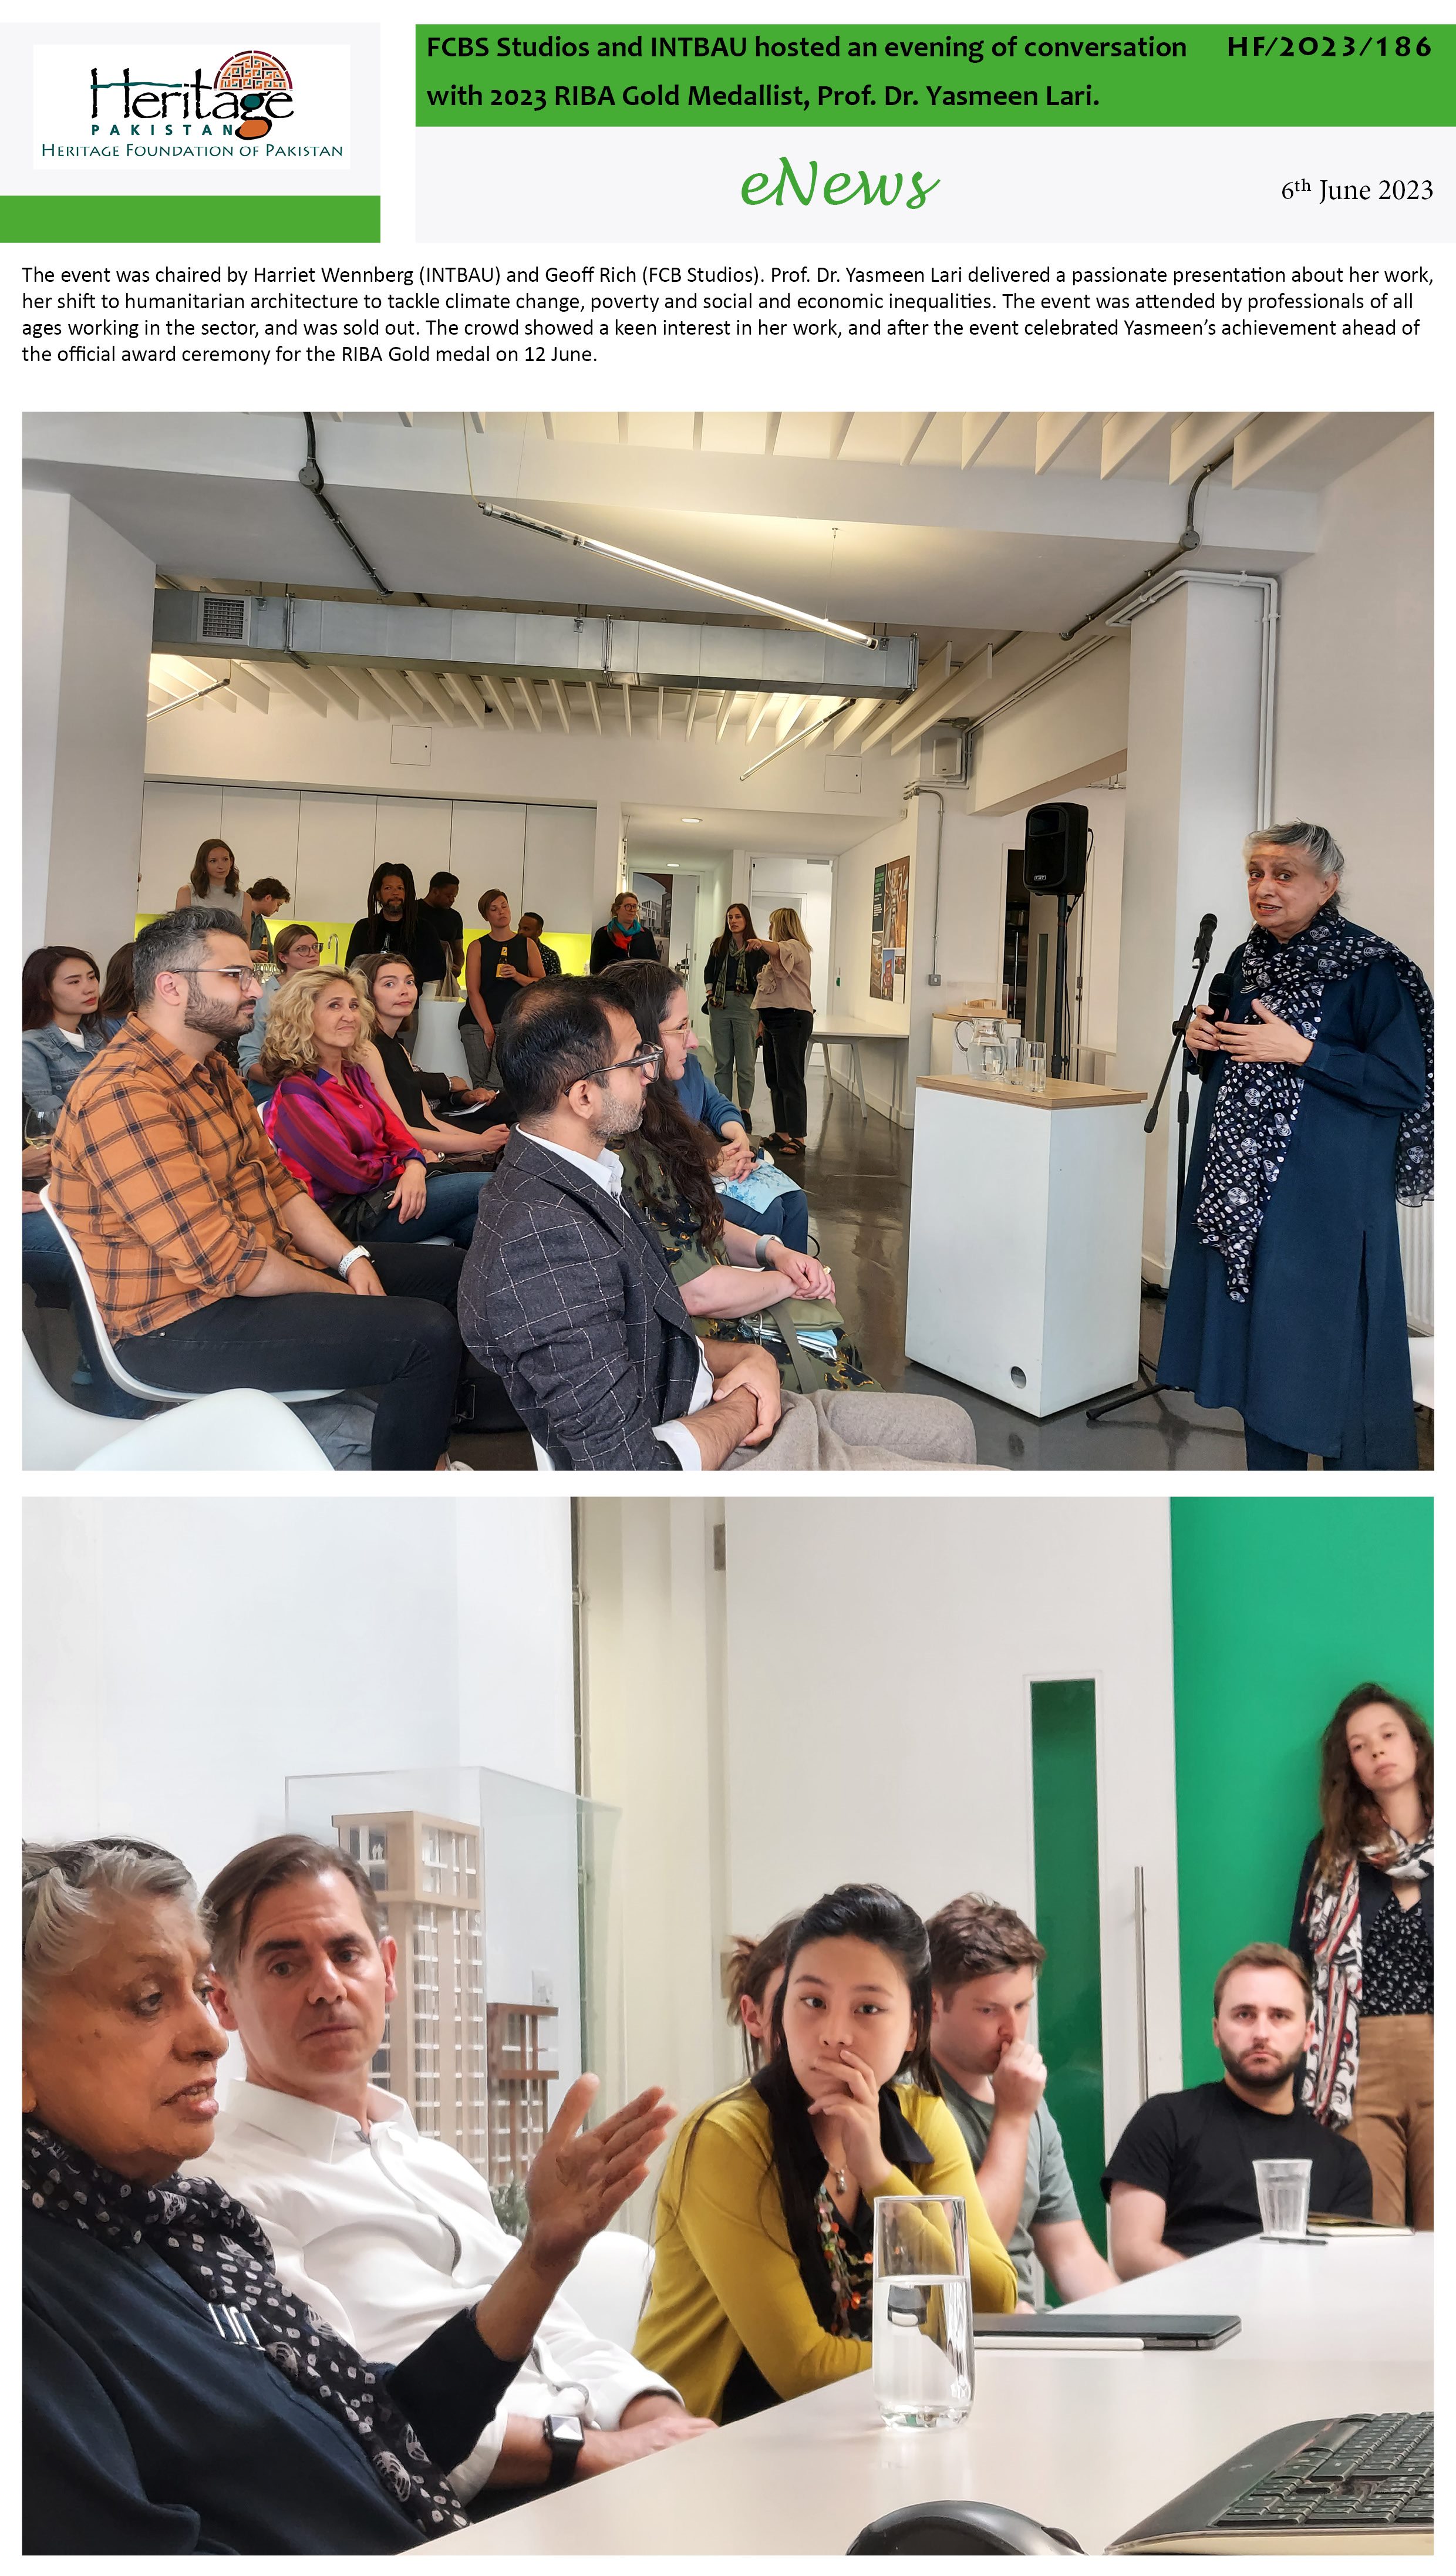 FCBS Studios and INTBAU hosted an evening of conversation with 2023 RIBA Gold Medallist, Prof. Dr. Yasmeen Lari.